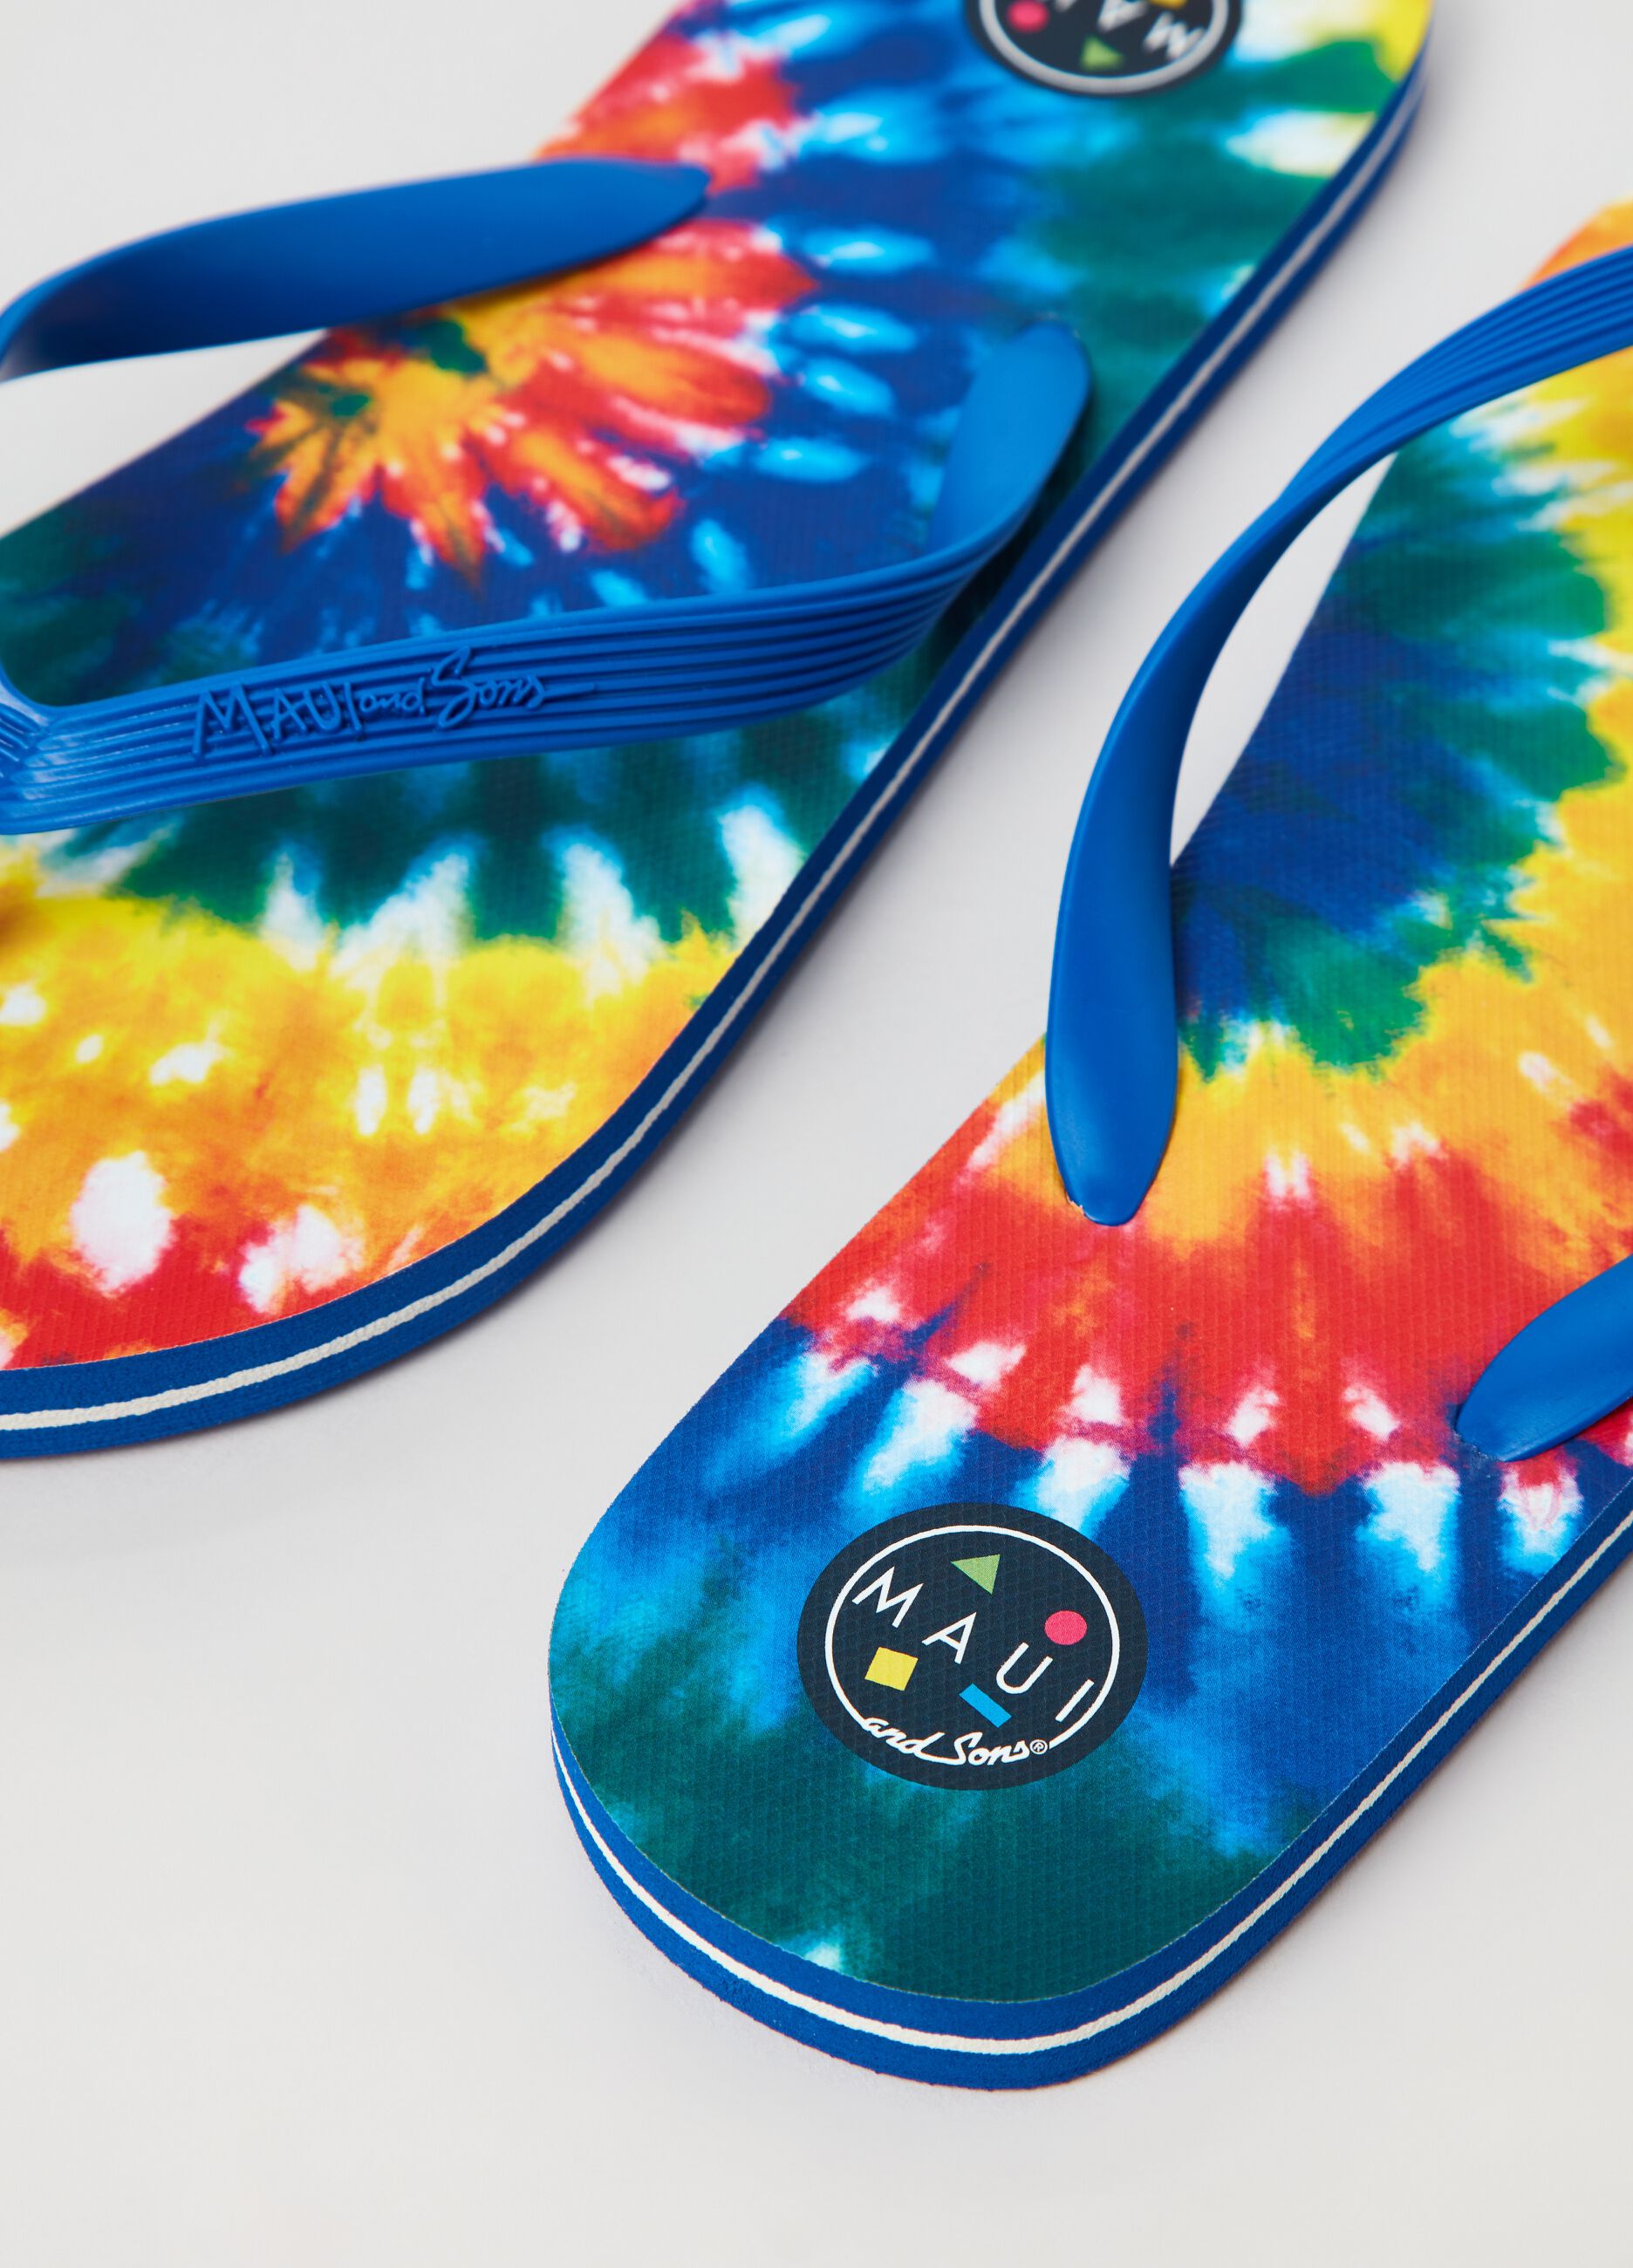 Infradito Tie Dye Maui and Sons